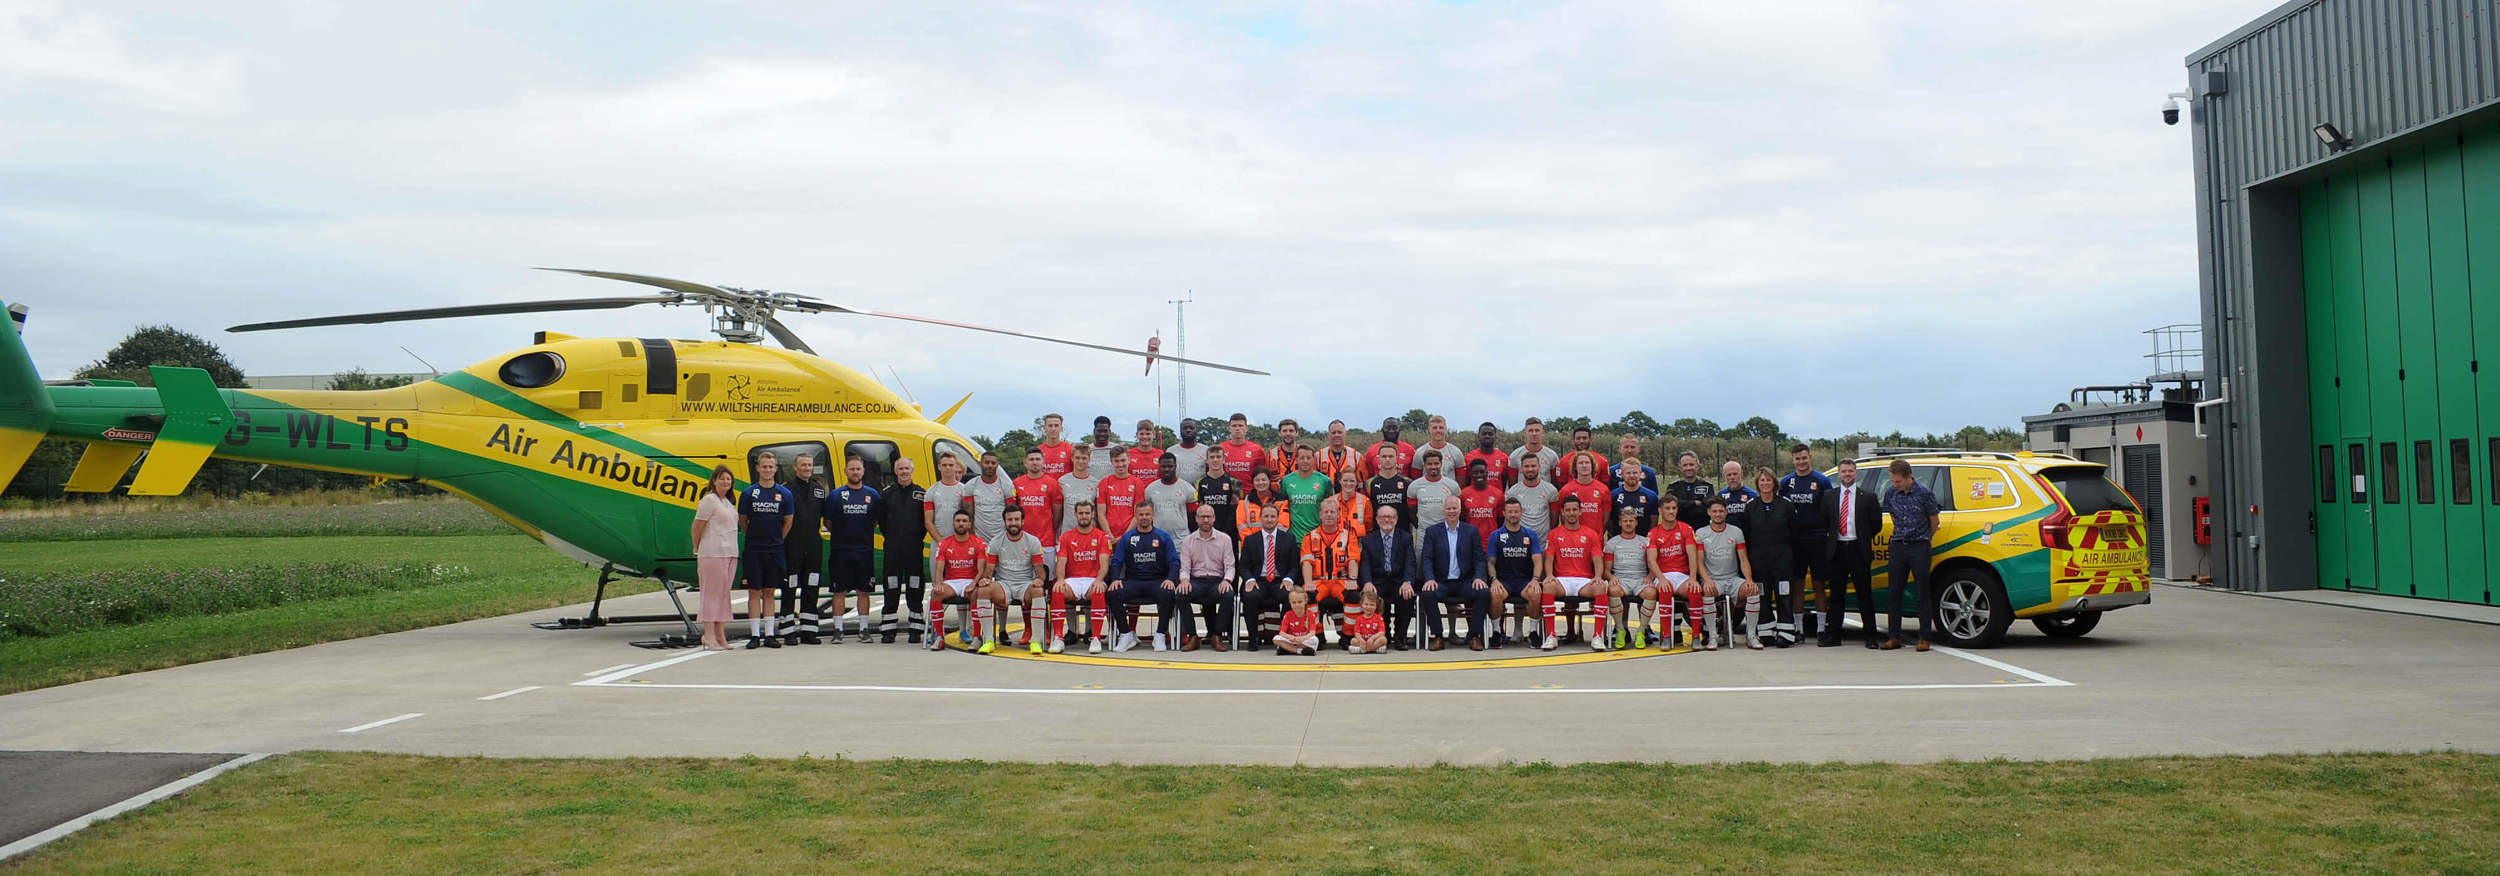 Swindon Town Football Club players official team photo for the 2019/20 season with the Wiltshire Air Ambulance helicopter and critical care car, on WAA's helipad